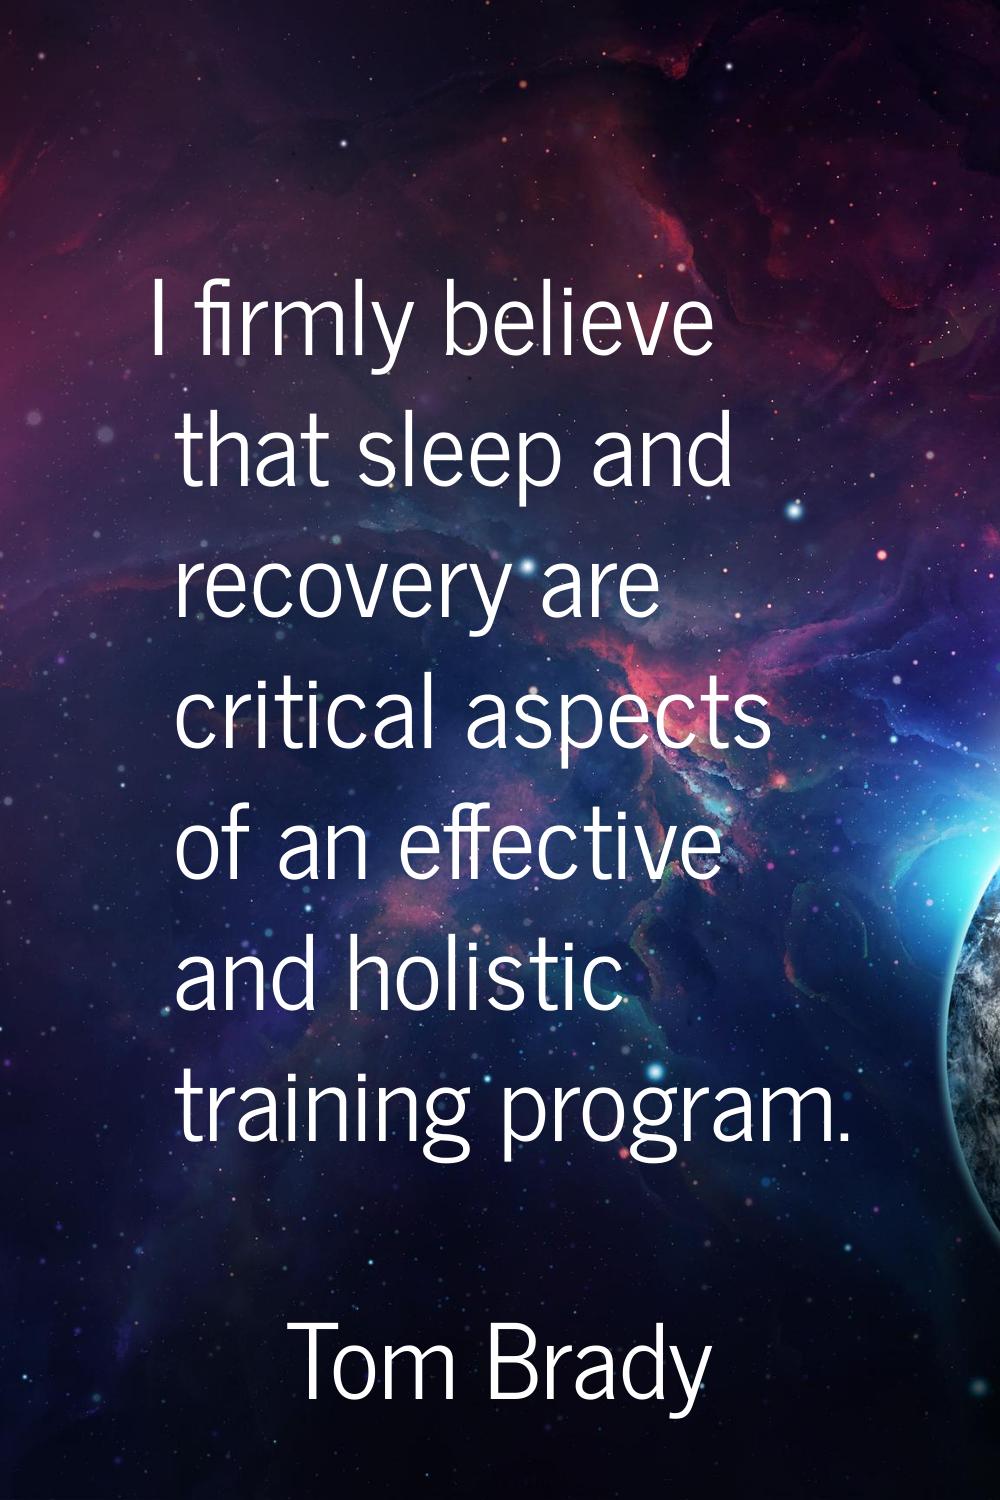 I firmly believe that sleep and recovery are critical aspects of an effective and holistic training